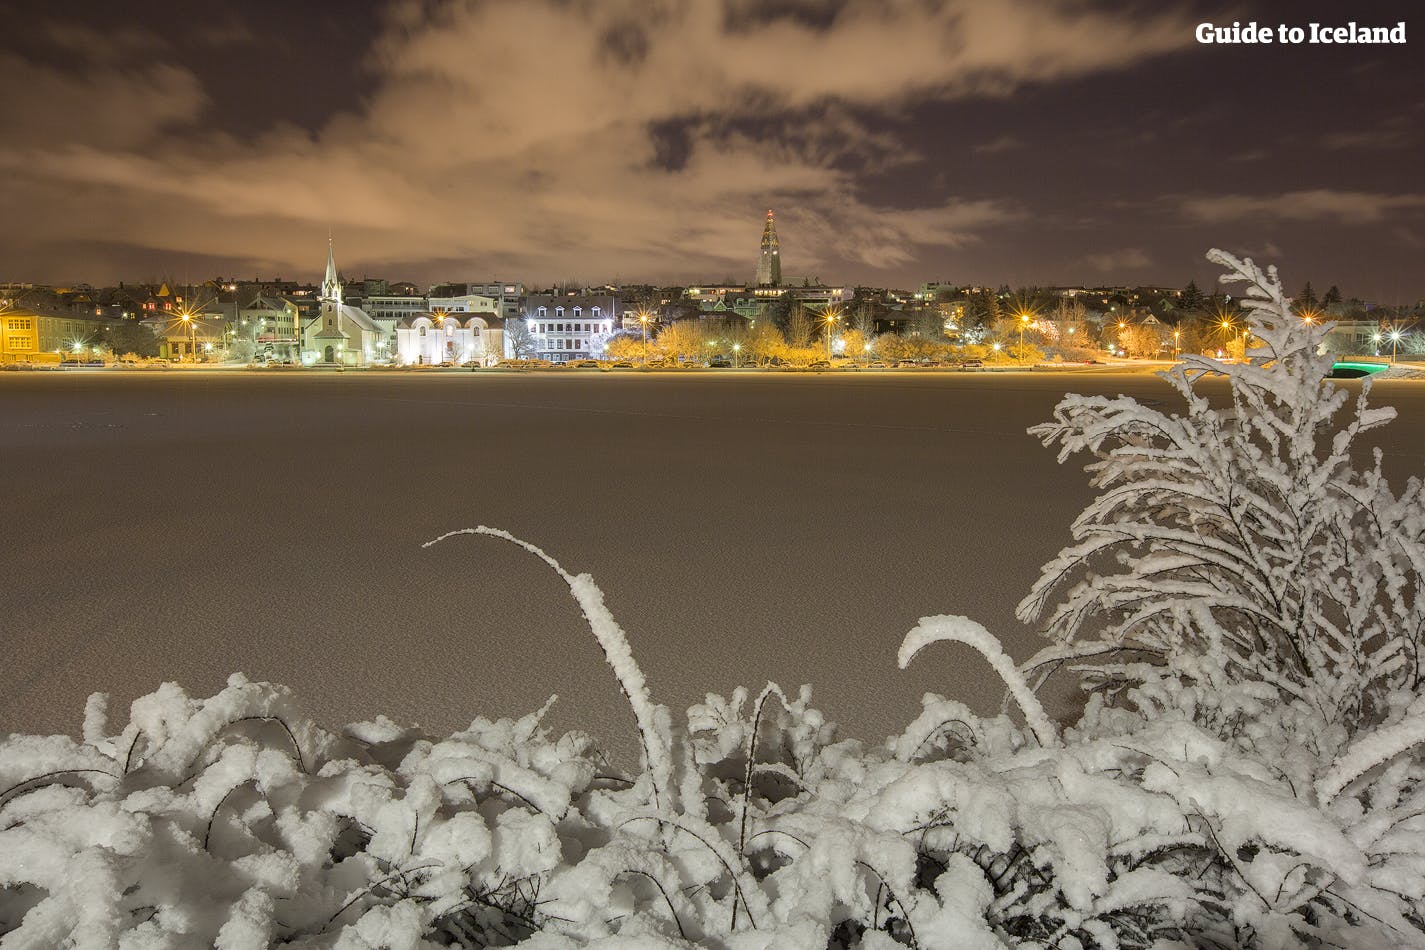 The capital of Iceland has a beautiful, glowing skyline throughout the winter, seen here across the downtown pond of Tjörnin.